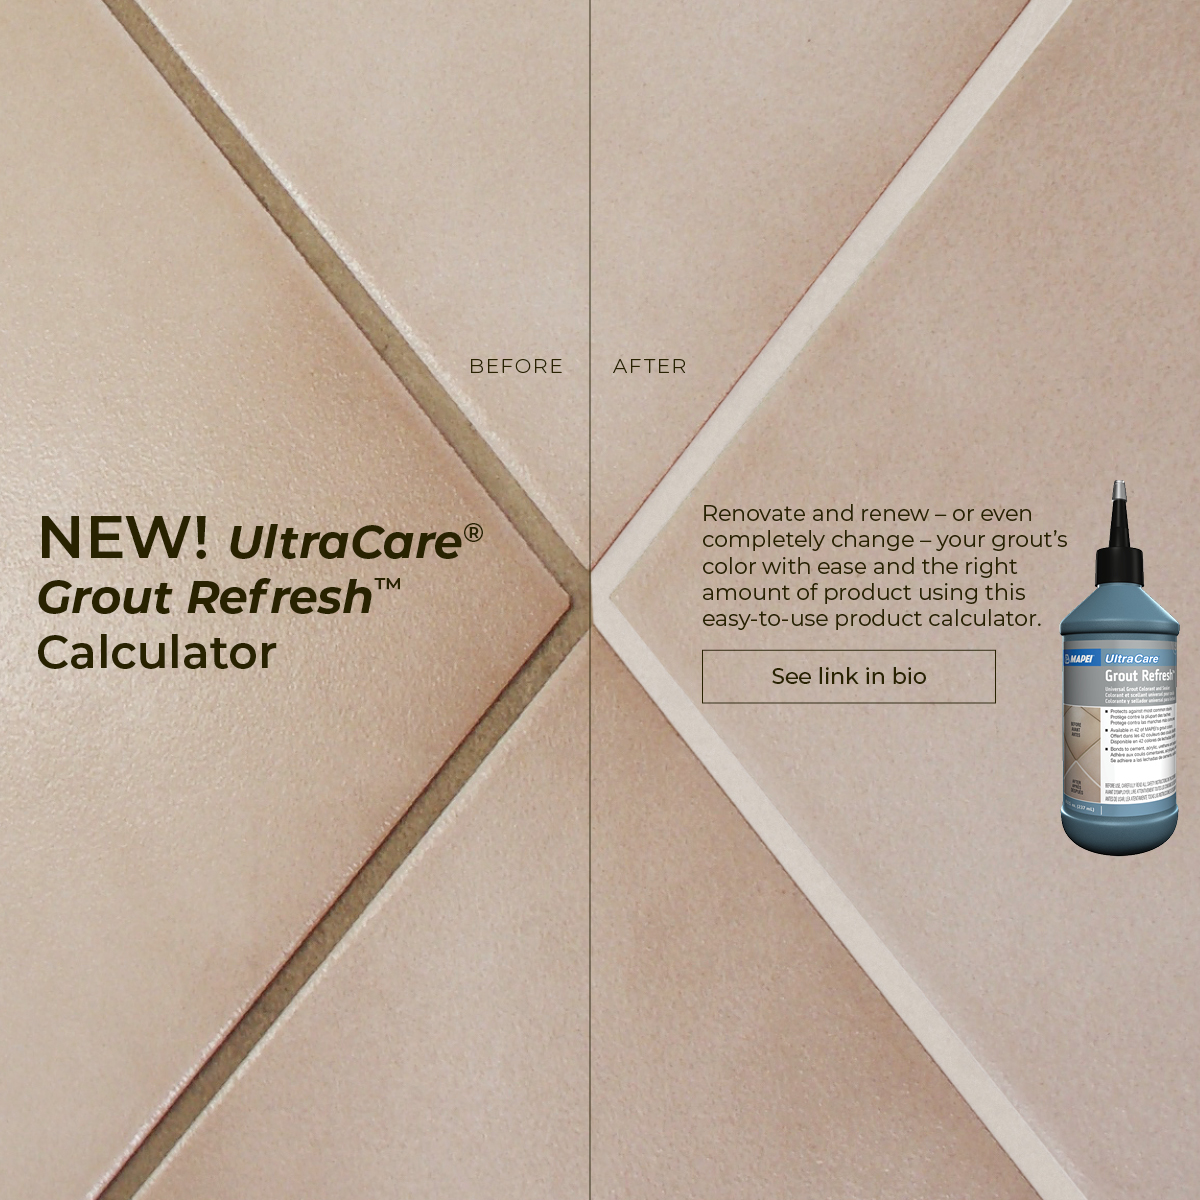 Renovate, renew — or even completely change — your grout color with this convenient calculator. 

📲 Check out our new UltraCare Grout Refresh calculator here: mapei.com/us/en-us/produ…